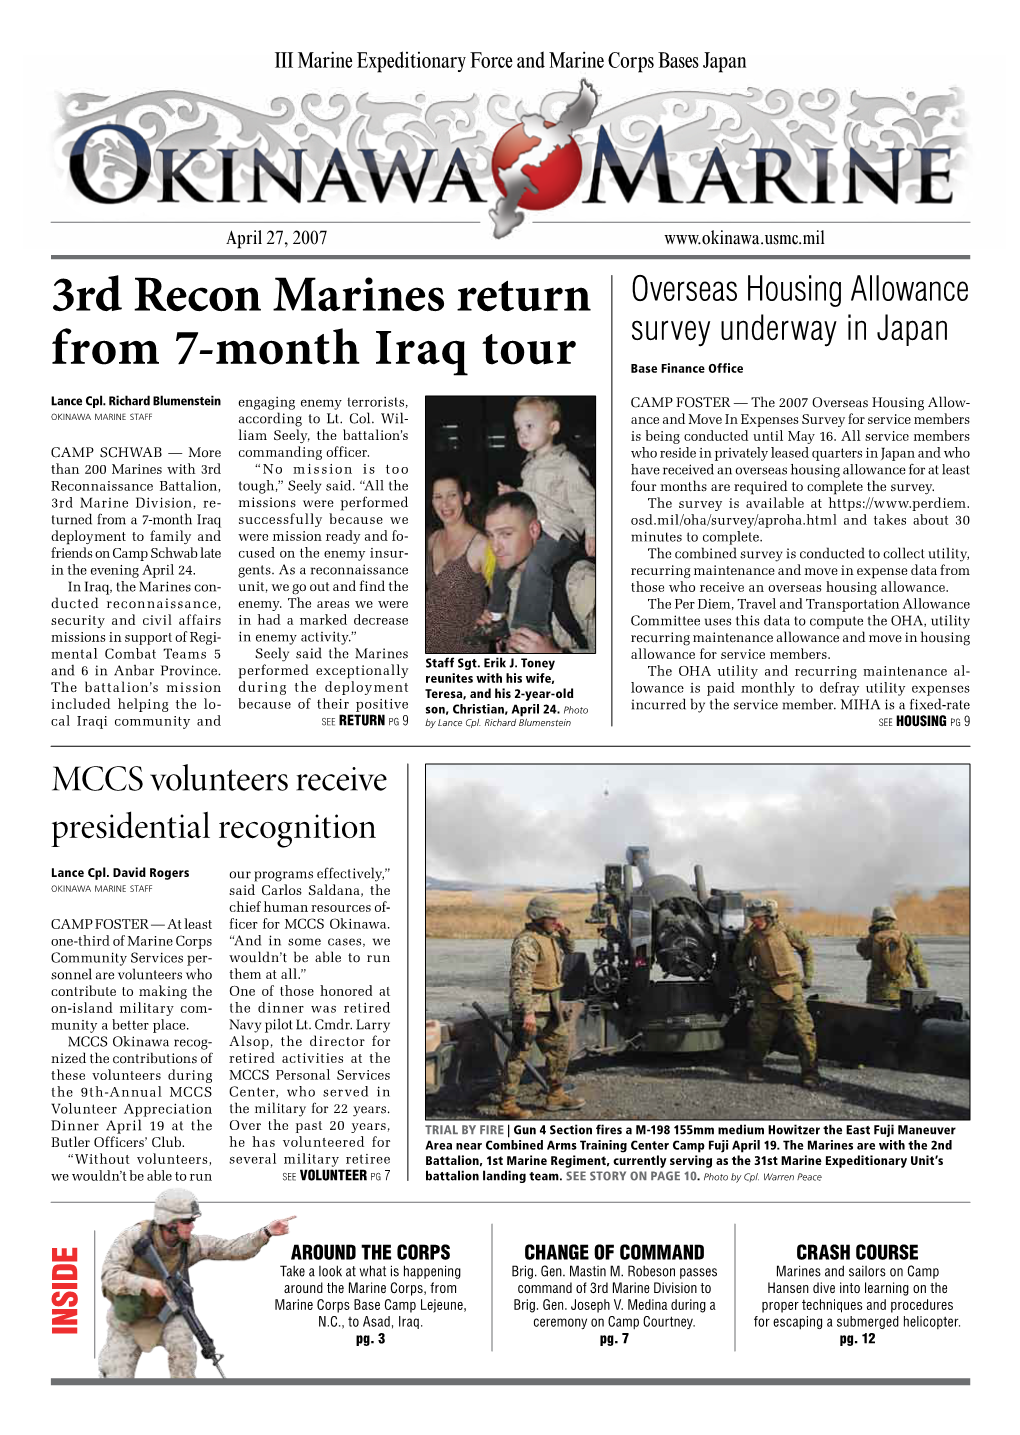 3Rd Recon Marines Return from 7-Month Iraq Tour